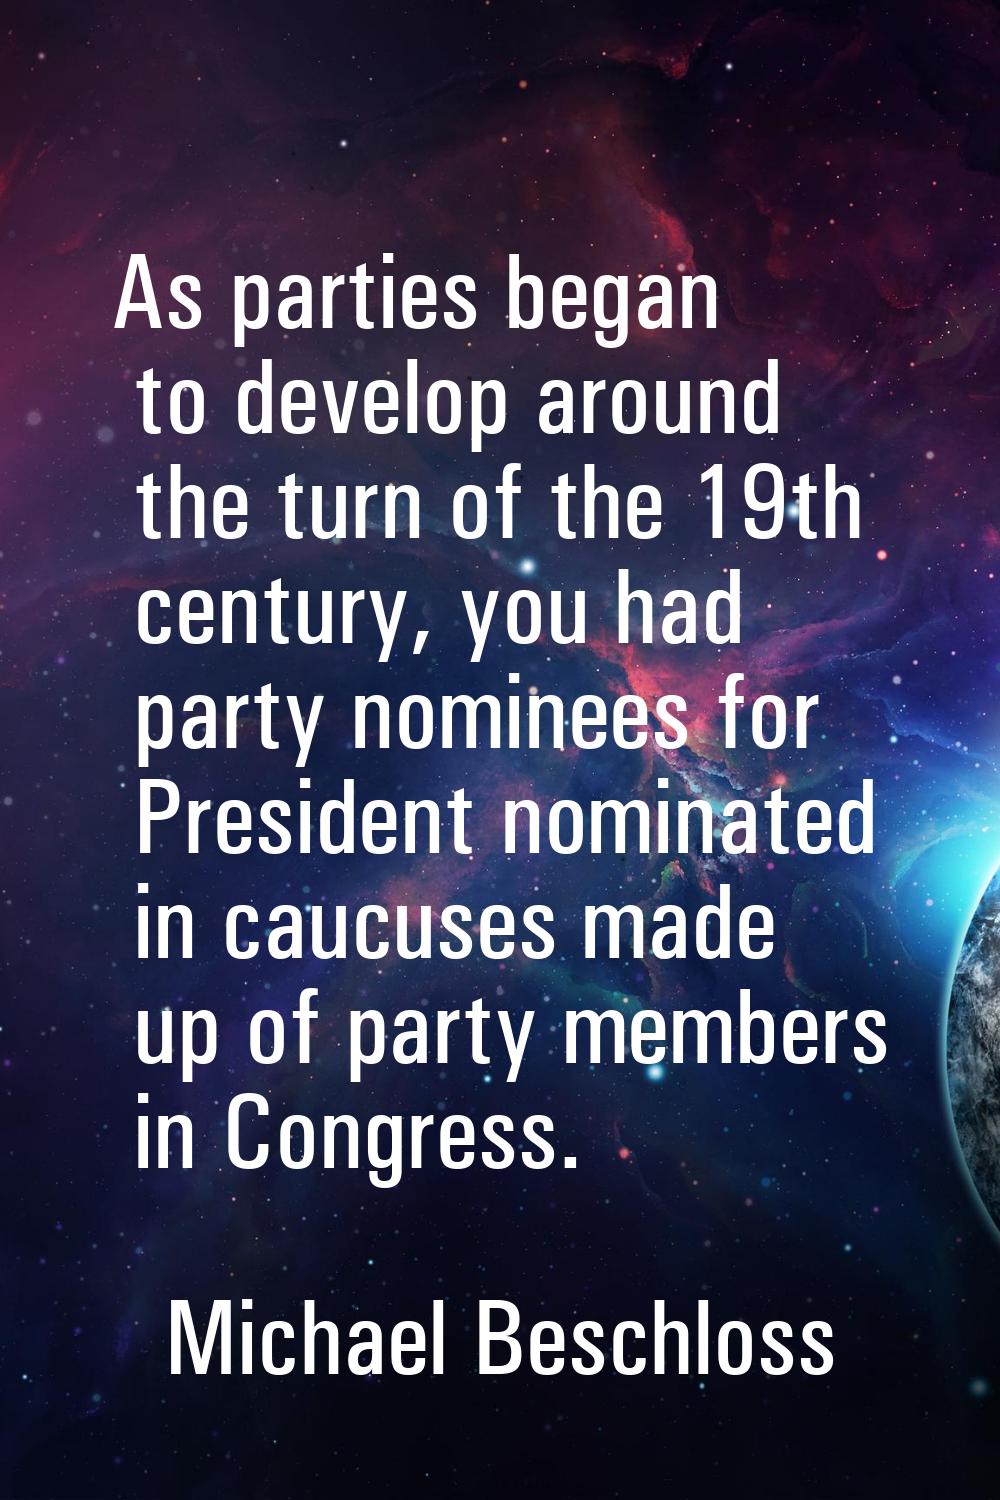 As parties began to develop around the turn of the 19th century, you had party nominees for Preside